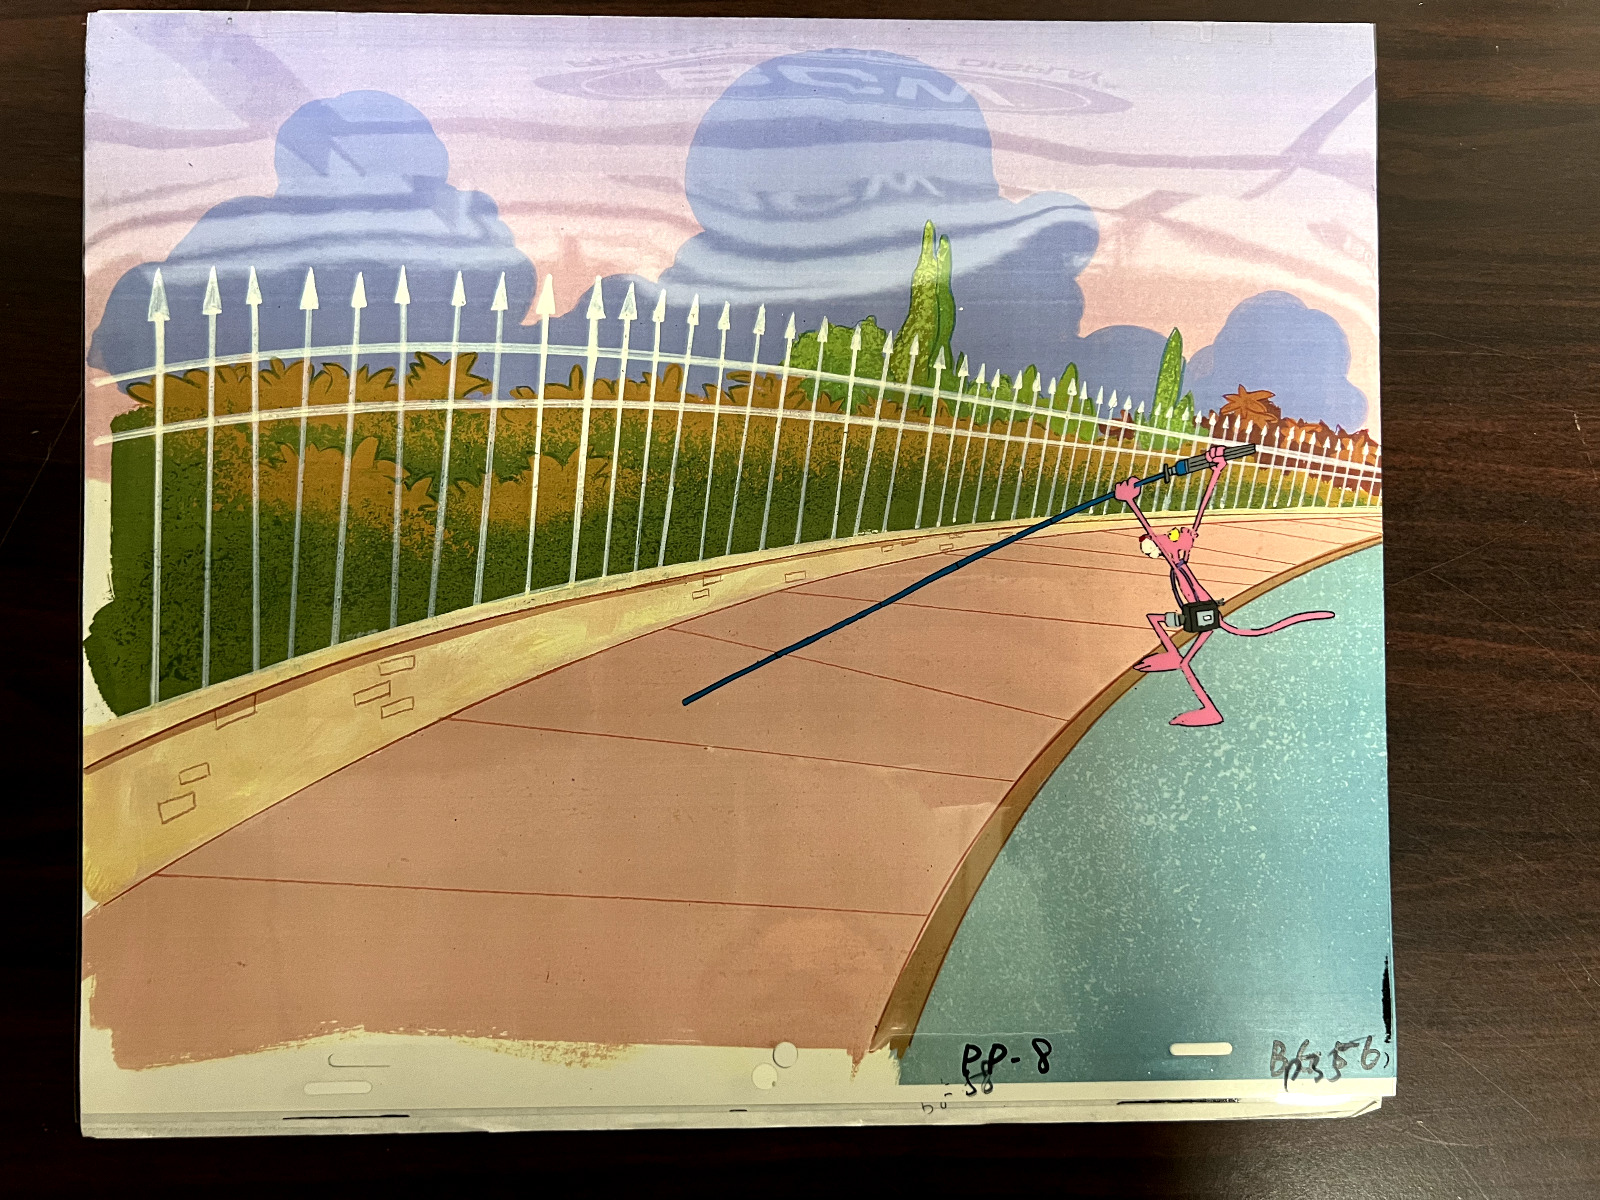 Pink Panther Original Production Art Cartoon Cell Cel Hand Painted, HUGE SALE